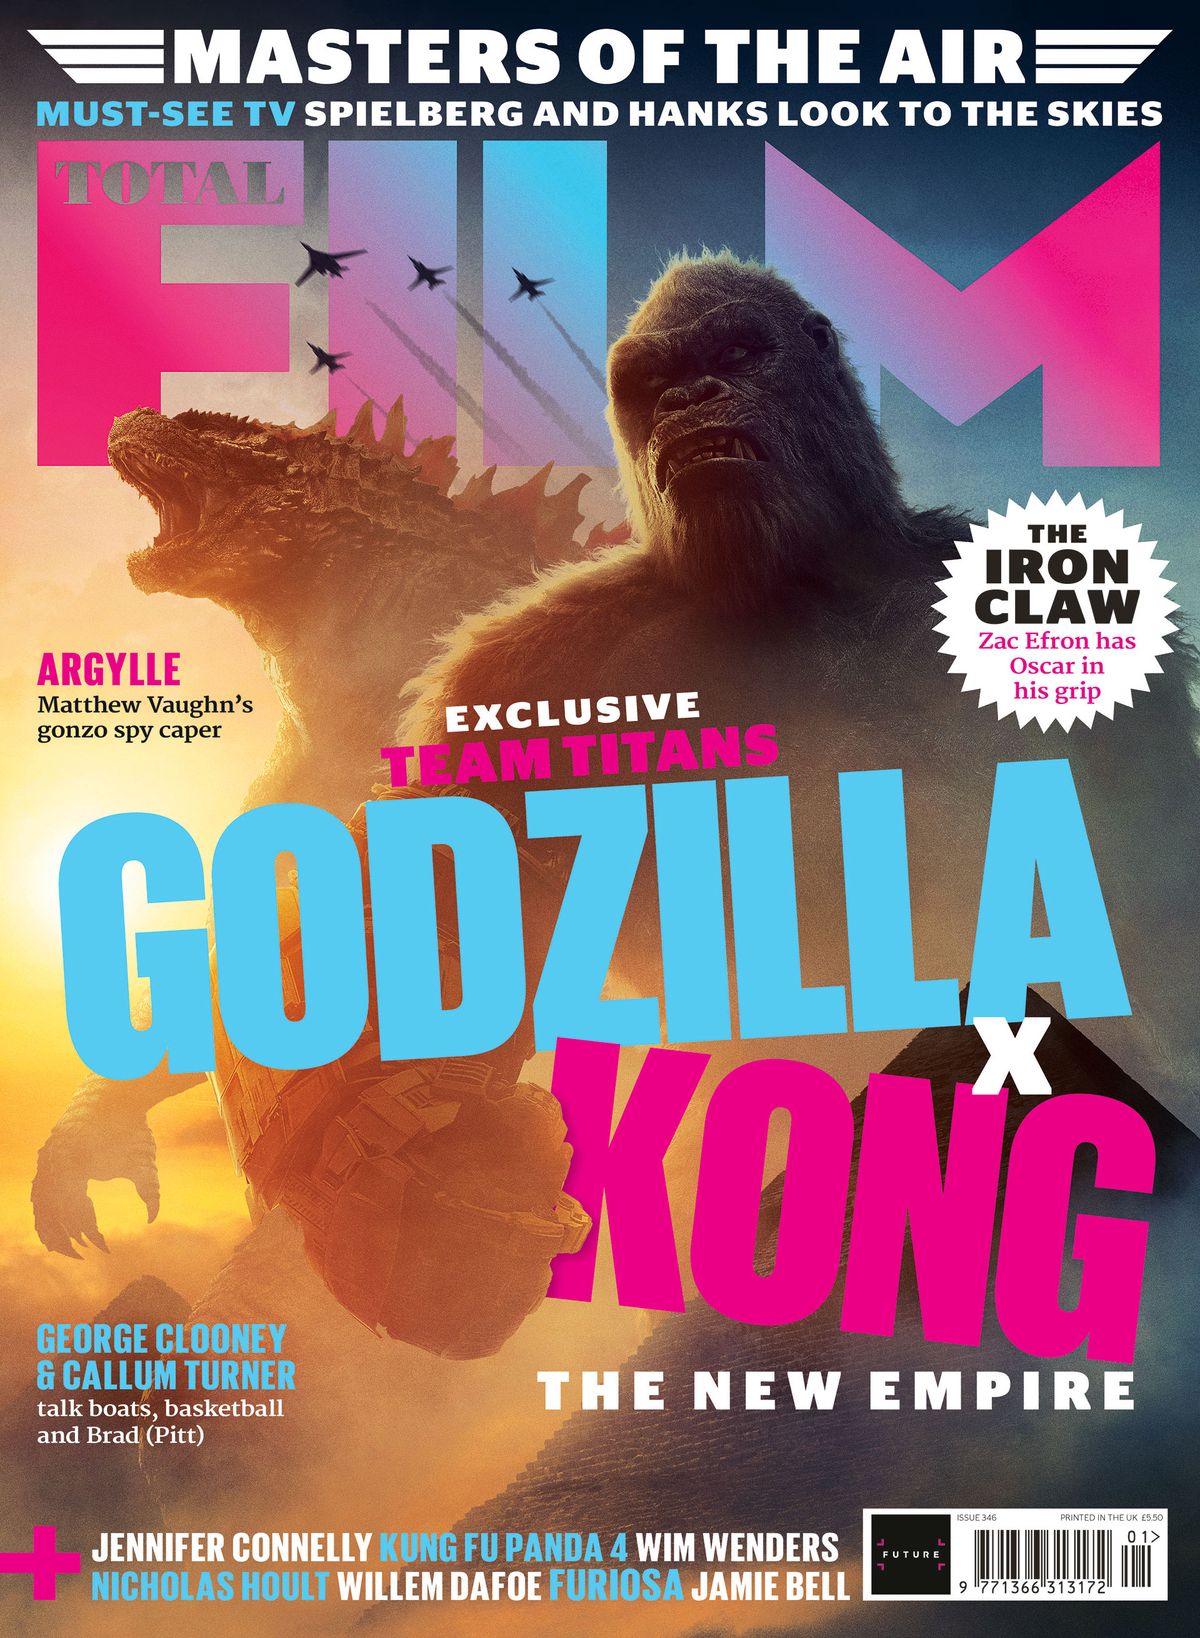 Godzilla x Kong The New Empire is on the cover of the new issue of